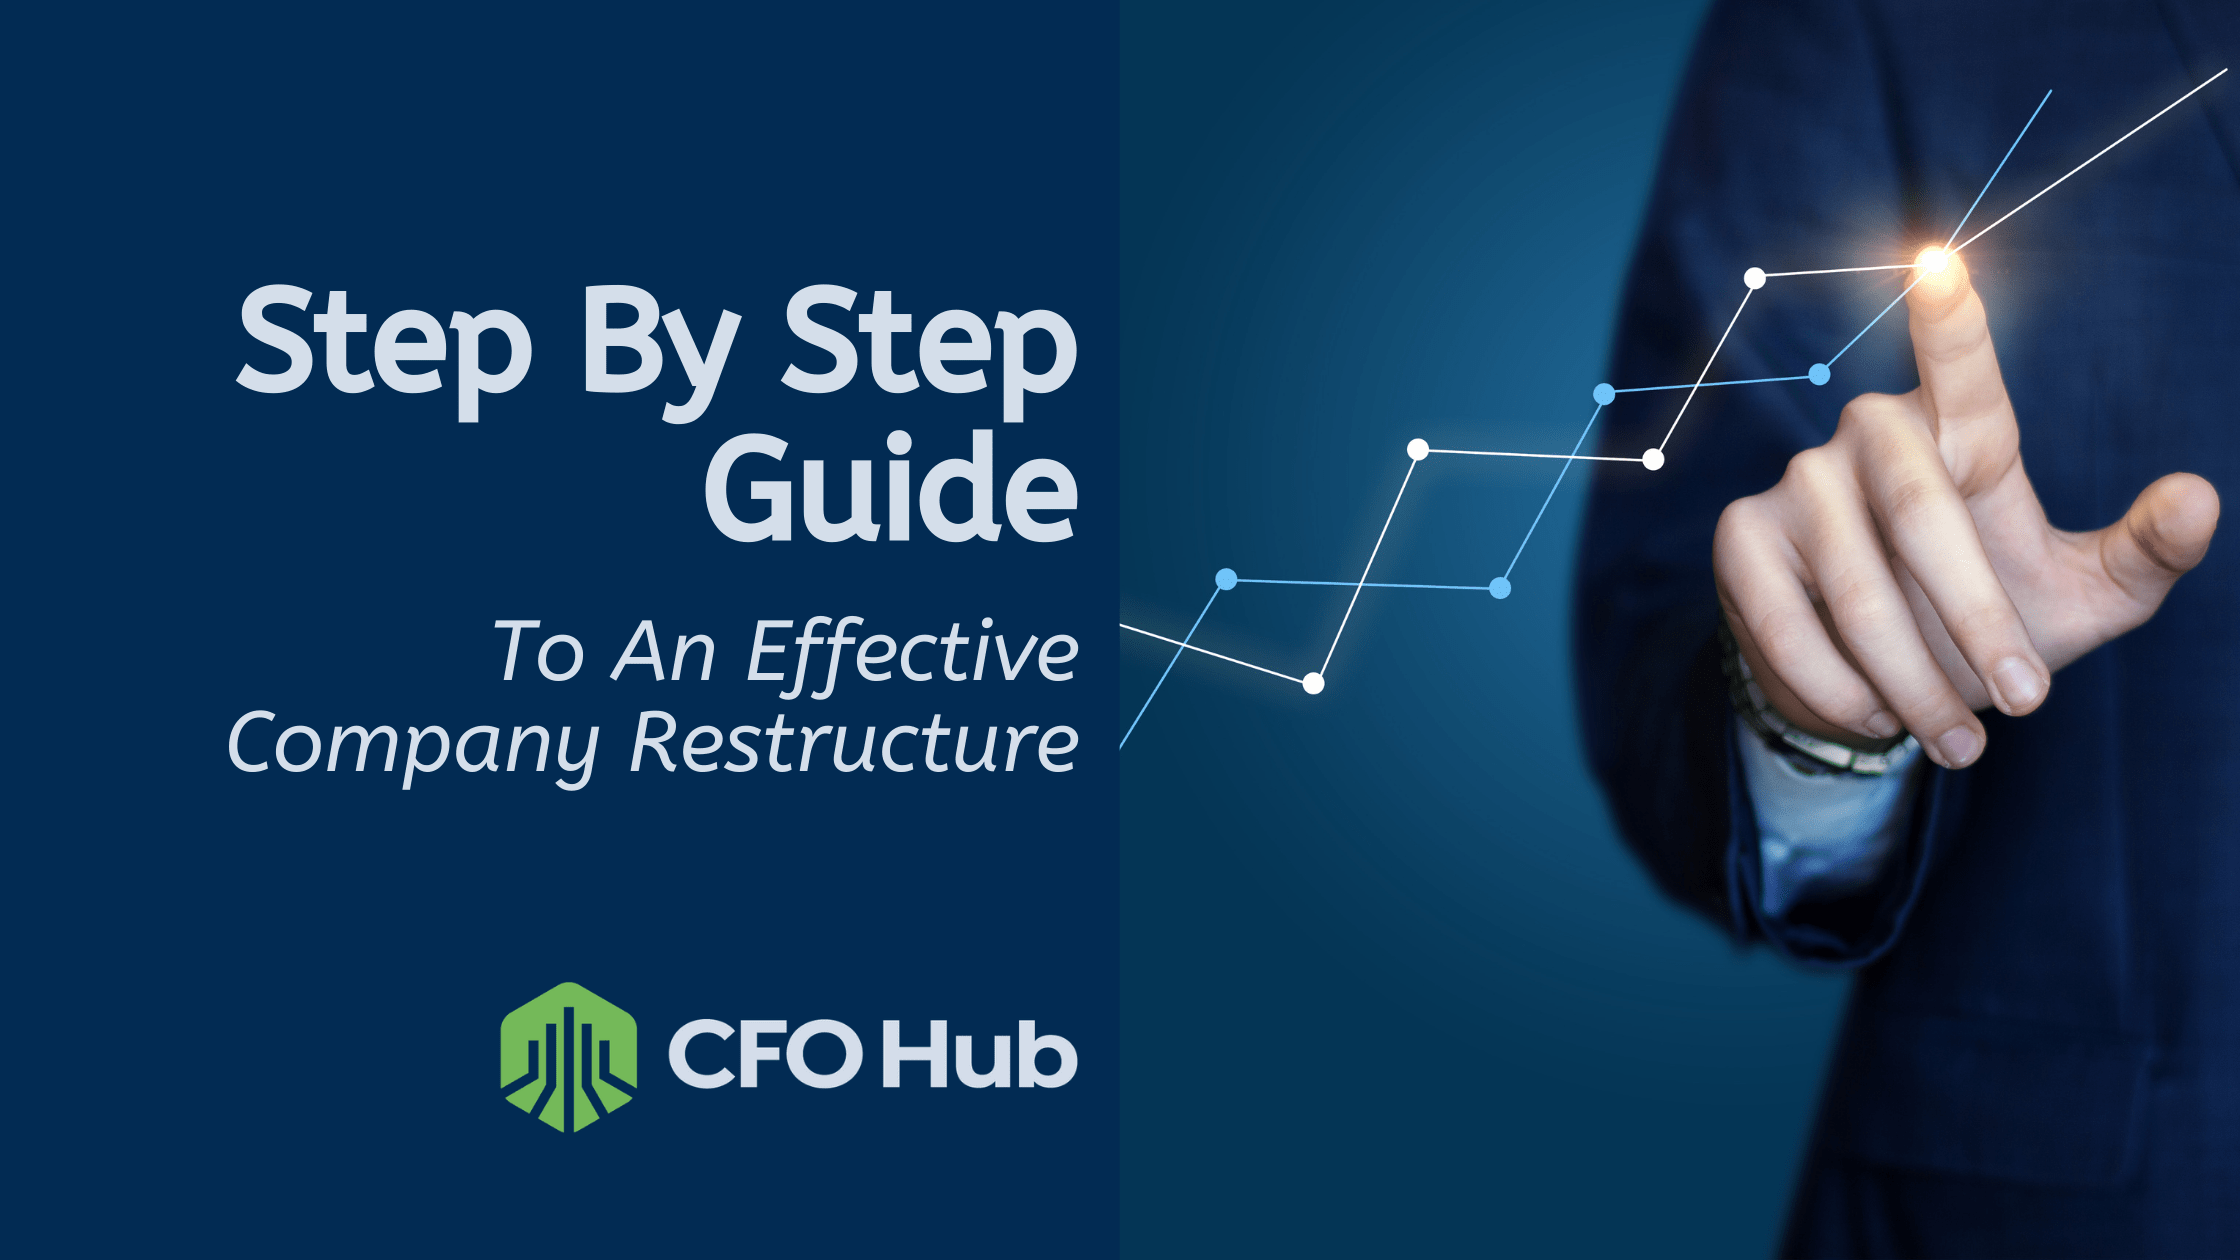 Guide to an effective company restructure